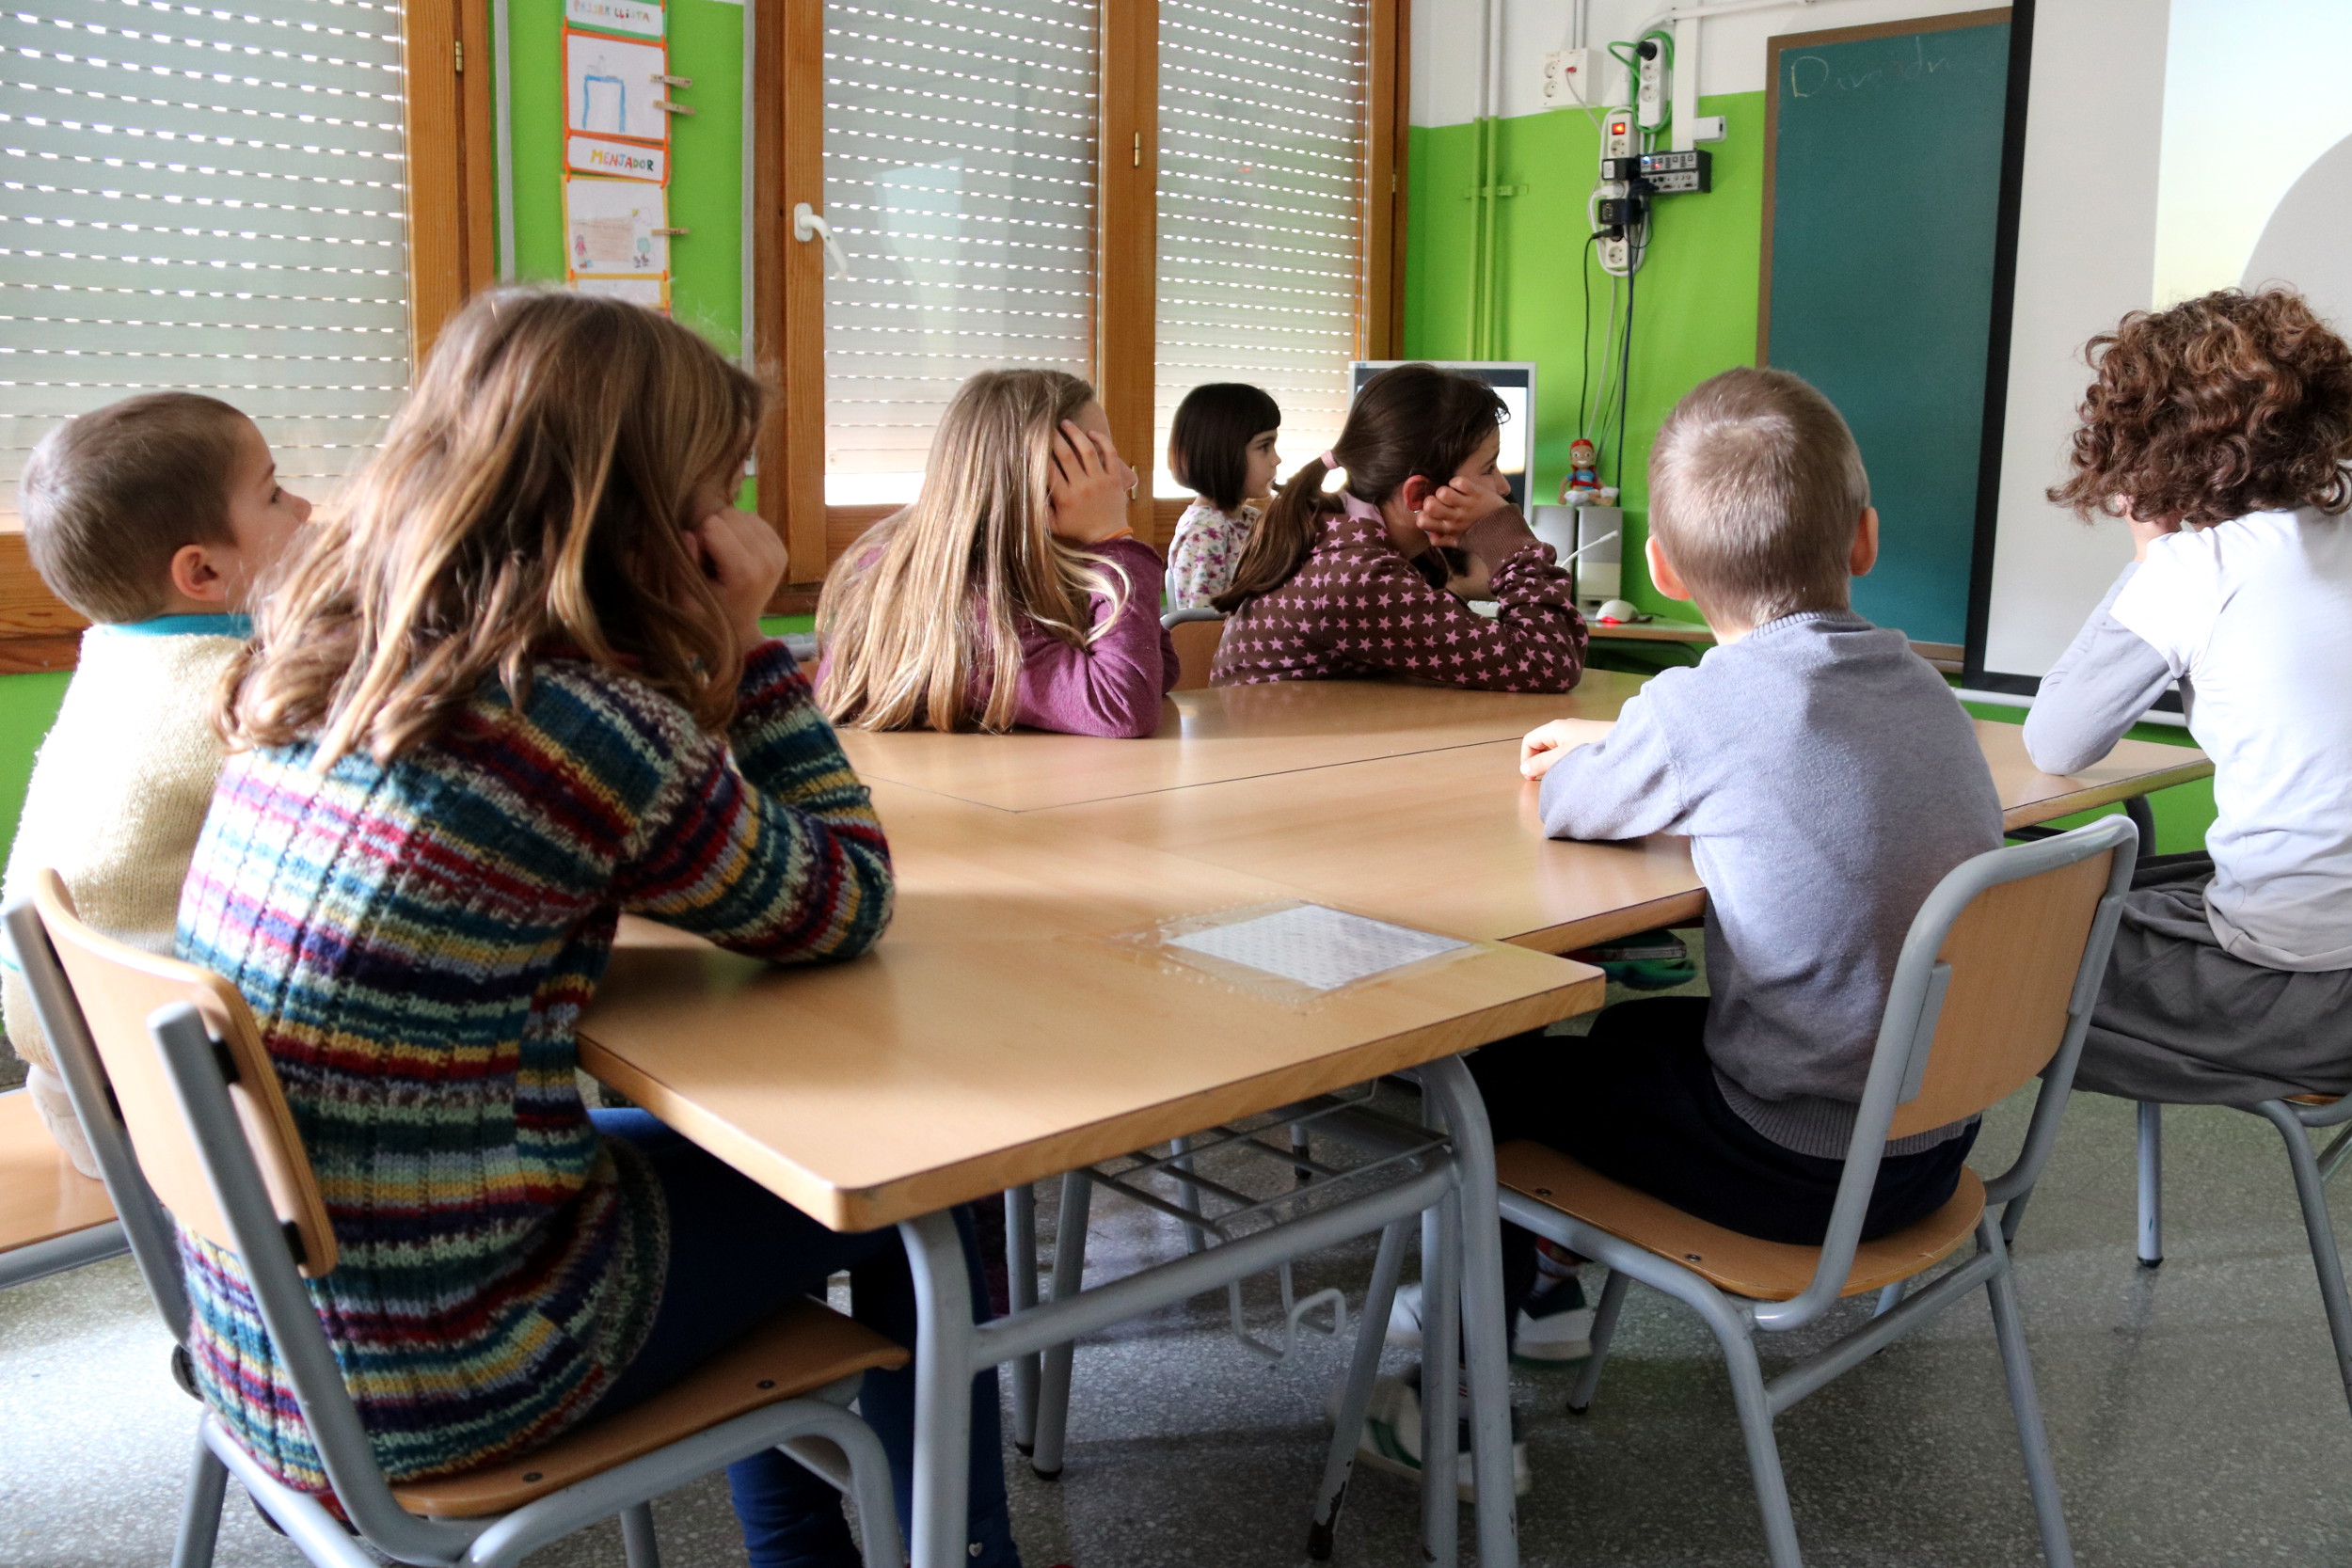 Students in a Catalan school (by ACN)